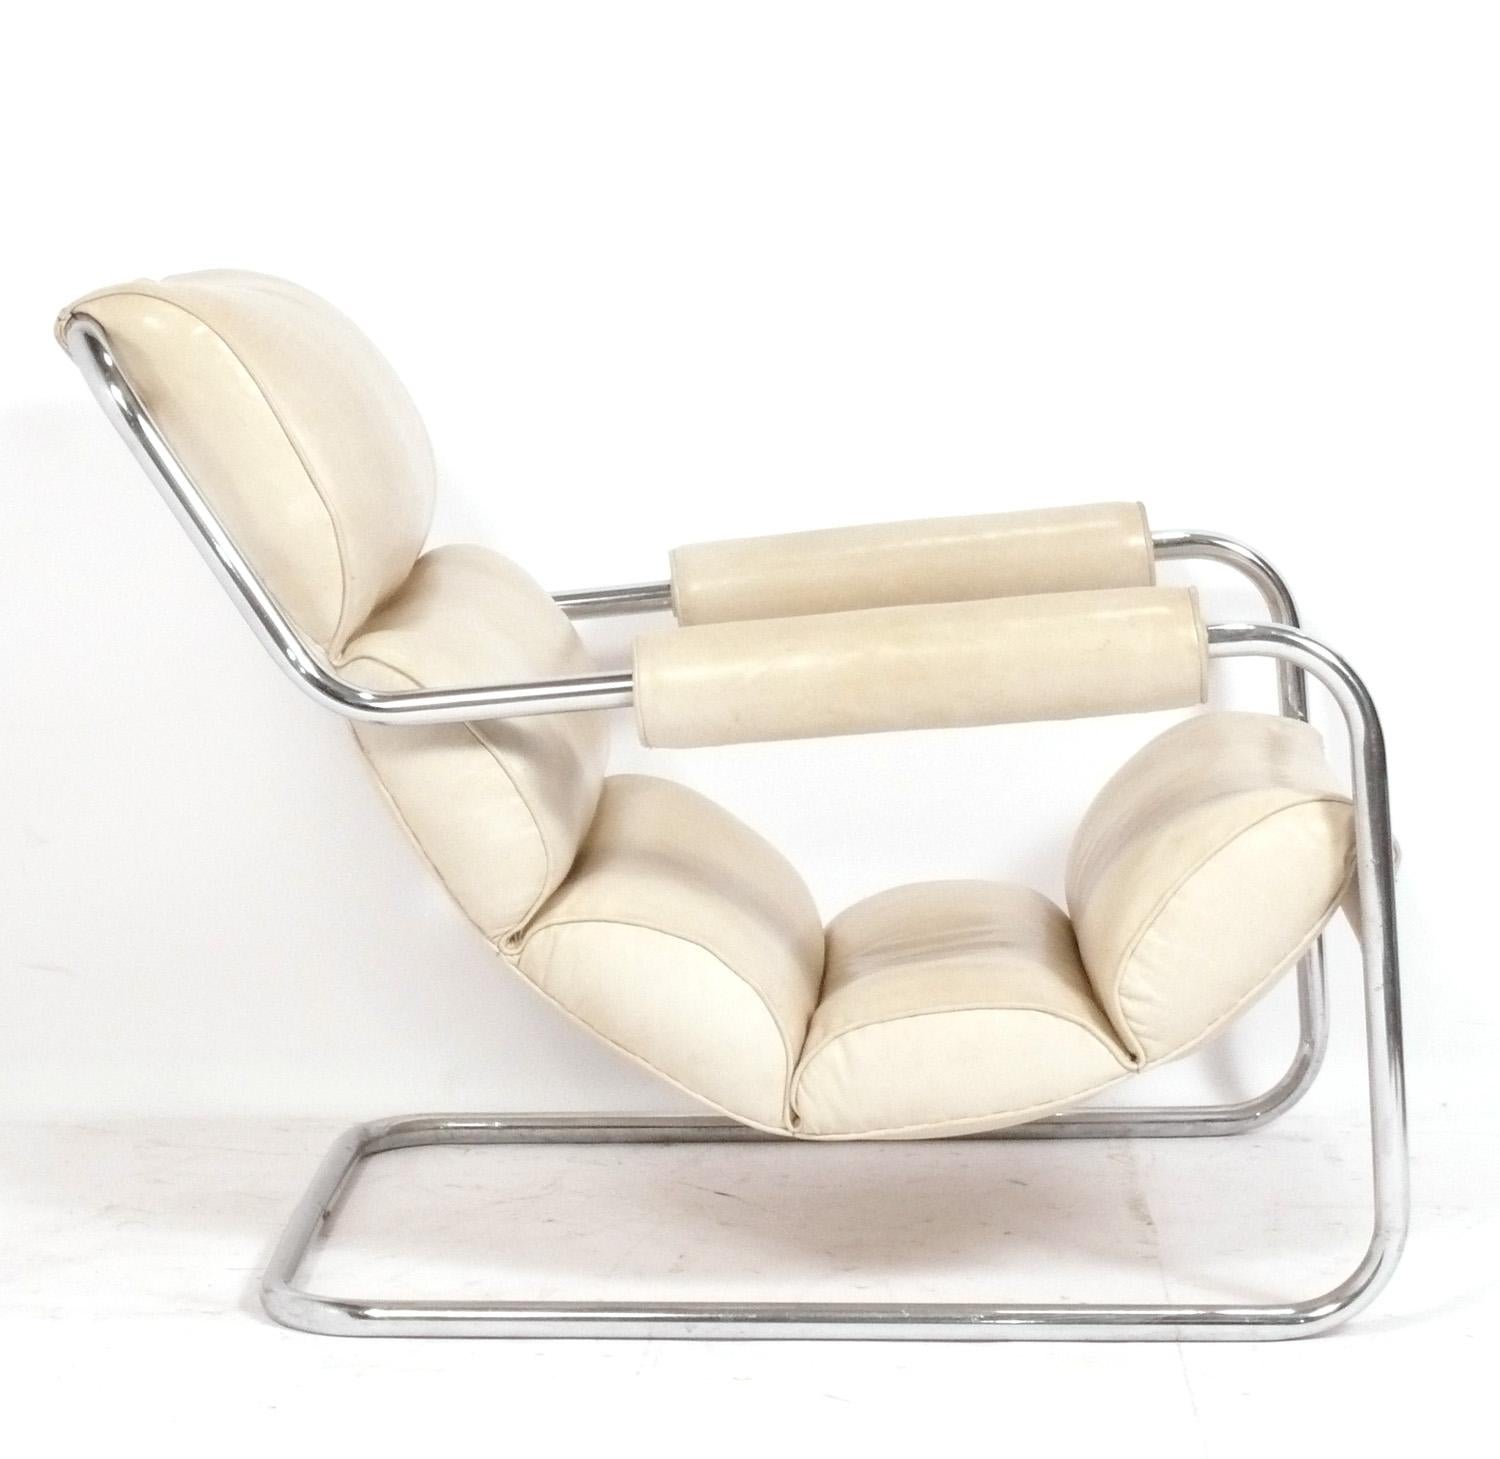 Rare Art Deco Chrome Lounge Chair, designed by Donald Deskey for Metallon, American, circa 1930s. This chair is documented in the period magazine Arts and Decoration, April 1935, pg. 31. See last two photos. It is also documented in the Sotheby's